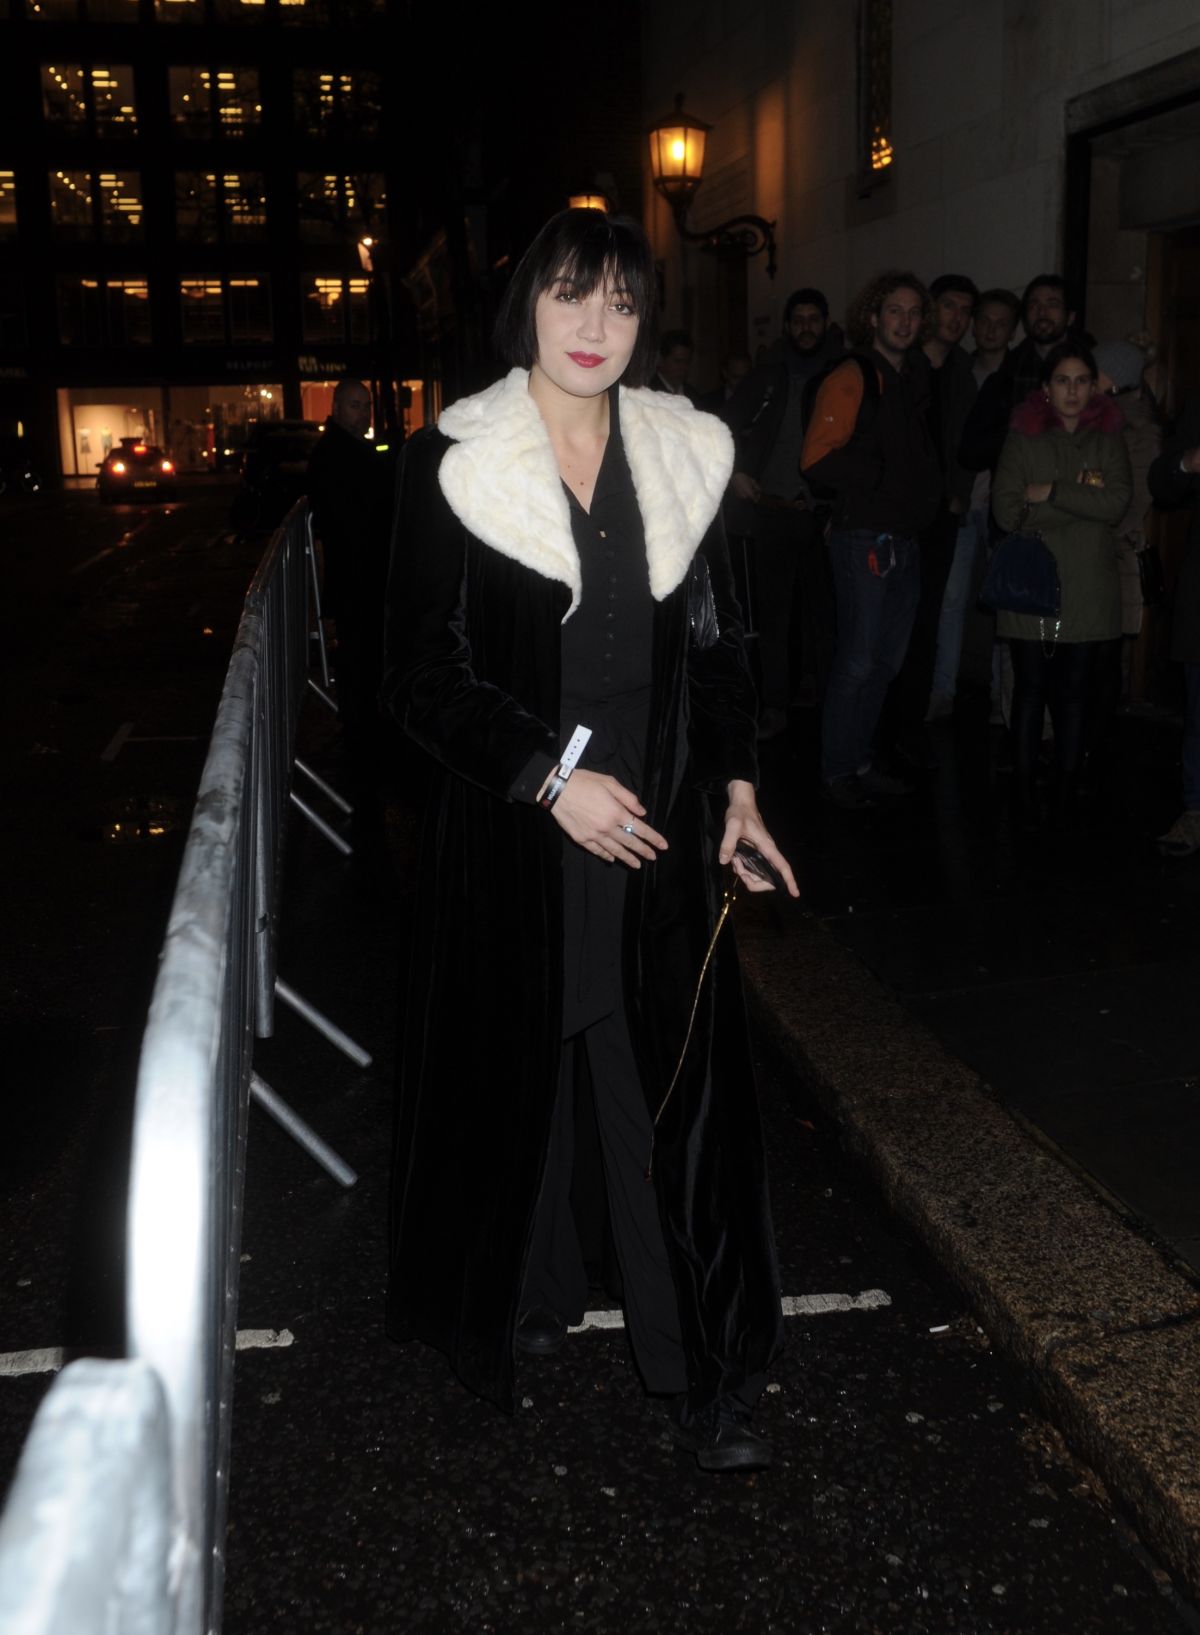 daisy-lowe-arrives-at-huawei-s-unfinished-symphony-in-london-02-04-2019-1.jpg